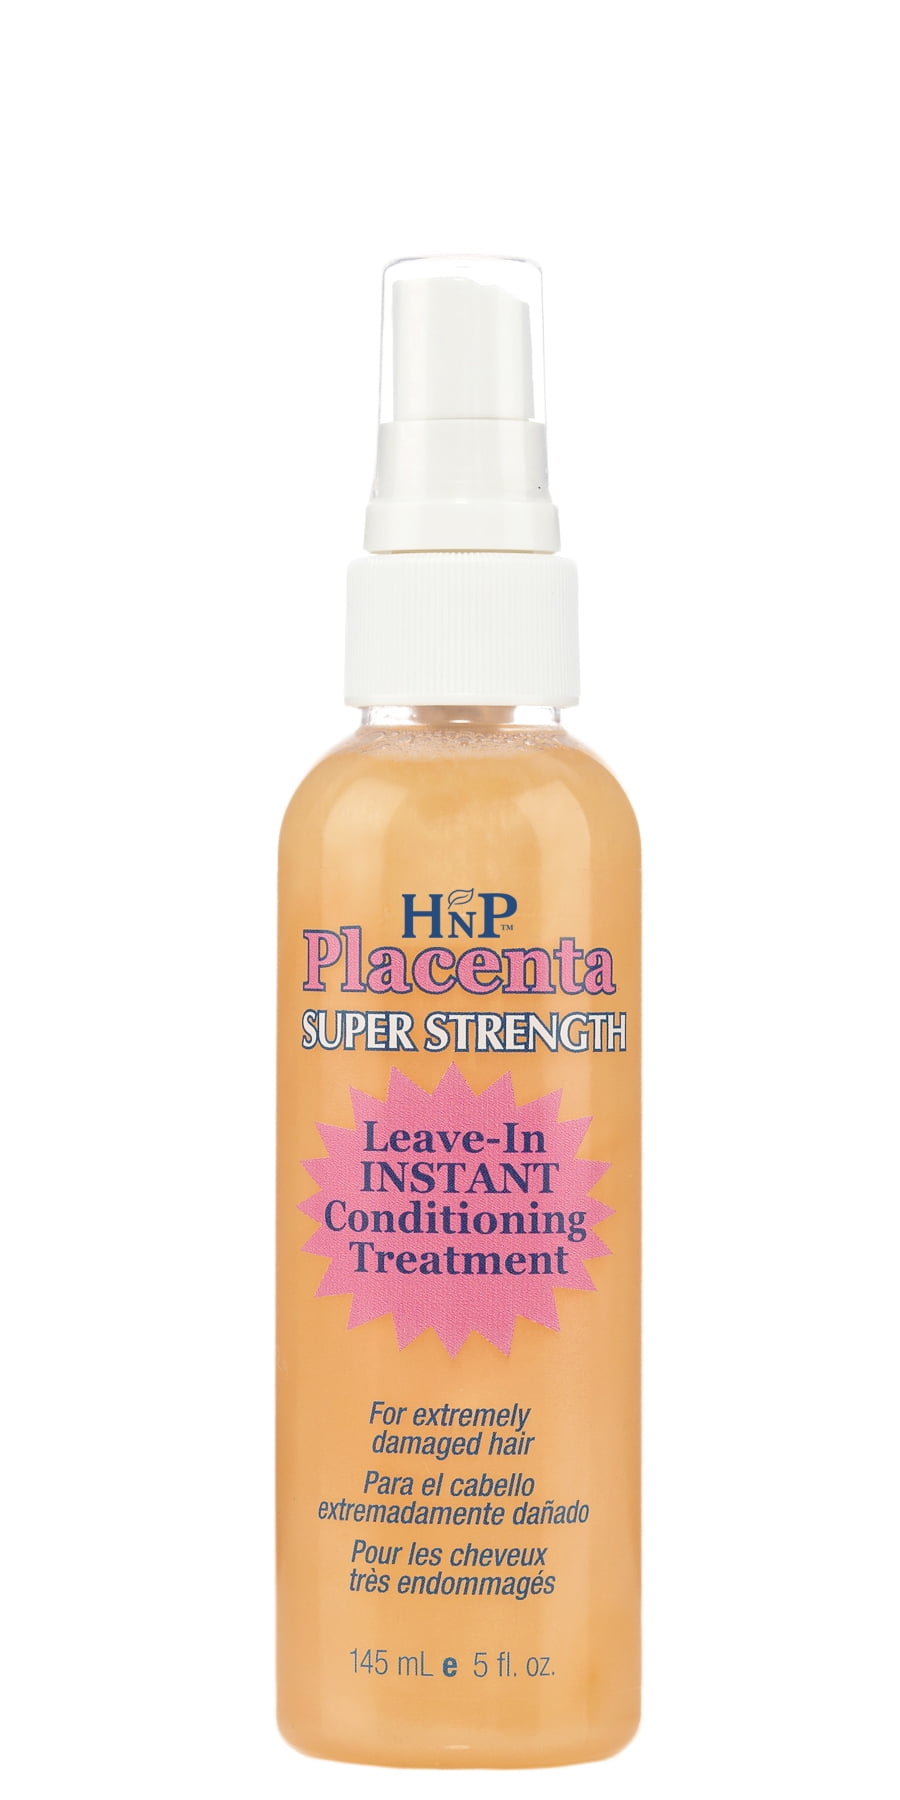 HnP Super Strength Placenta Leave-In Instant Conditioning Treatment Spray,  5 Fl. Oz. 